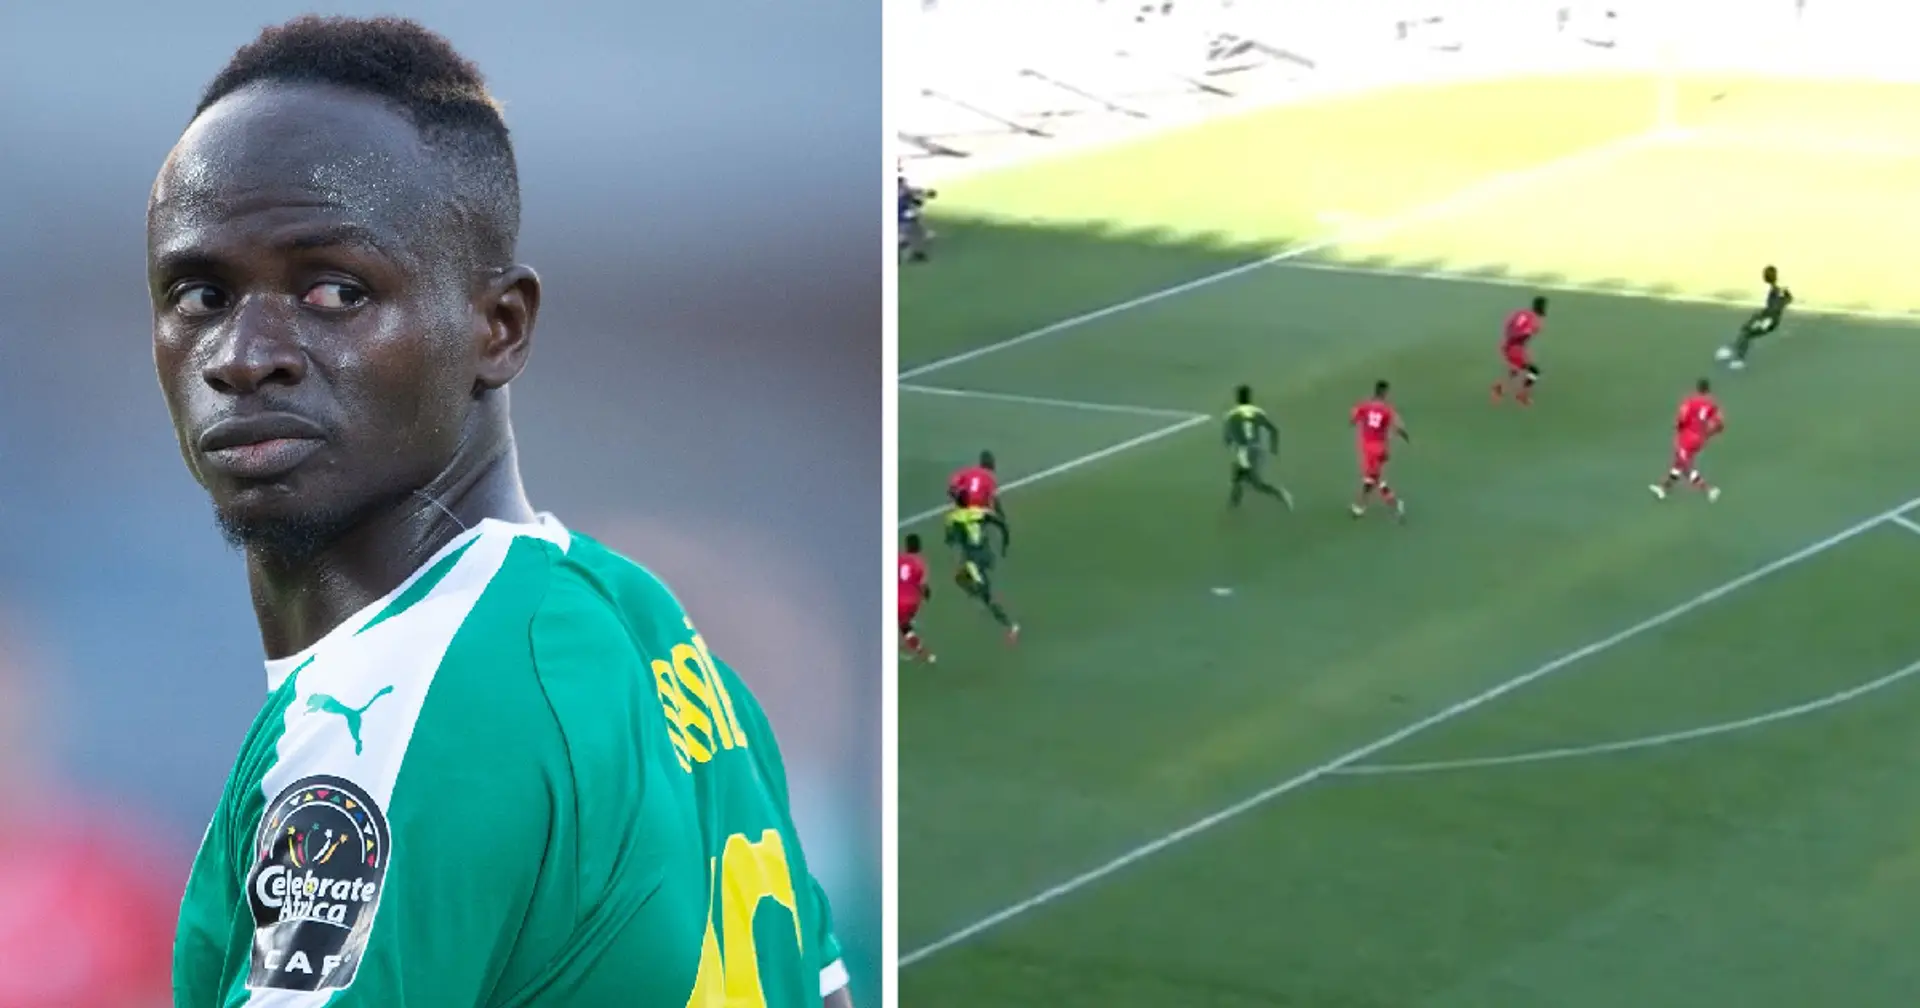 Mane's clinical cross and assist against Namibia - spotted